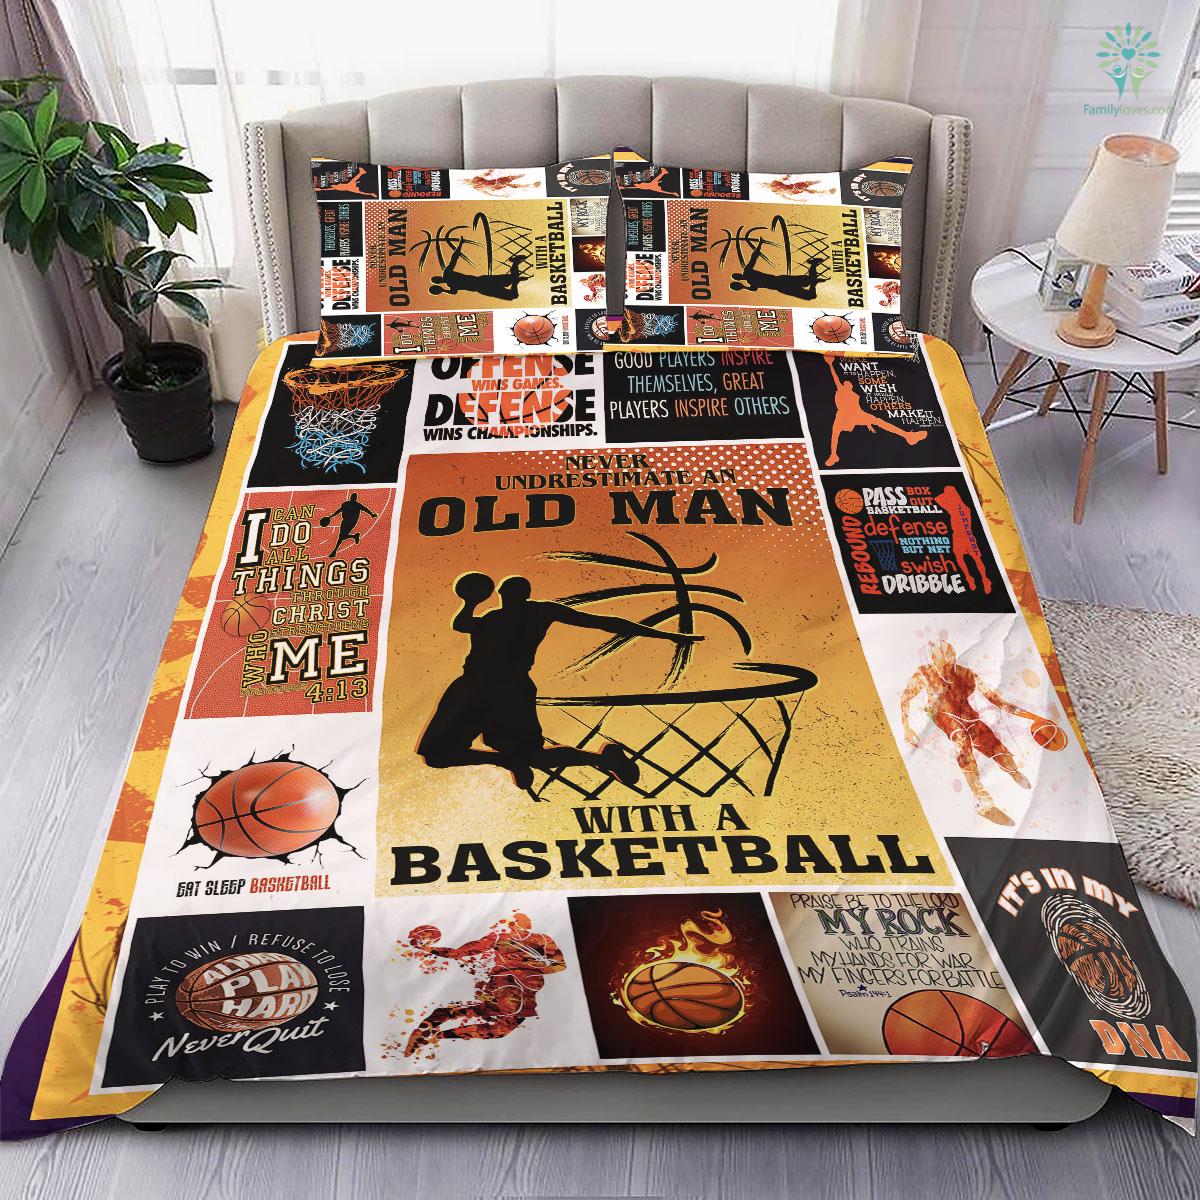 Basketball 2 Bedding Set - Family Loves US Military Veterans Shirts Gifts Ideas